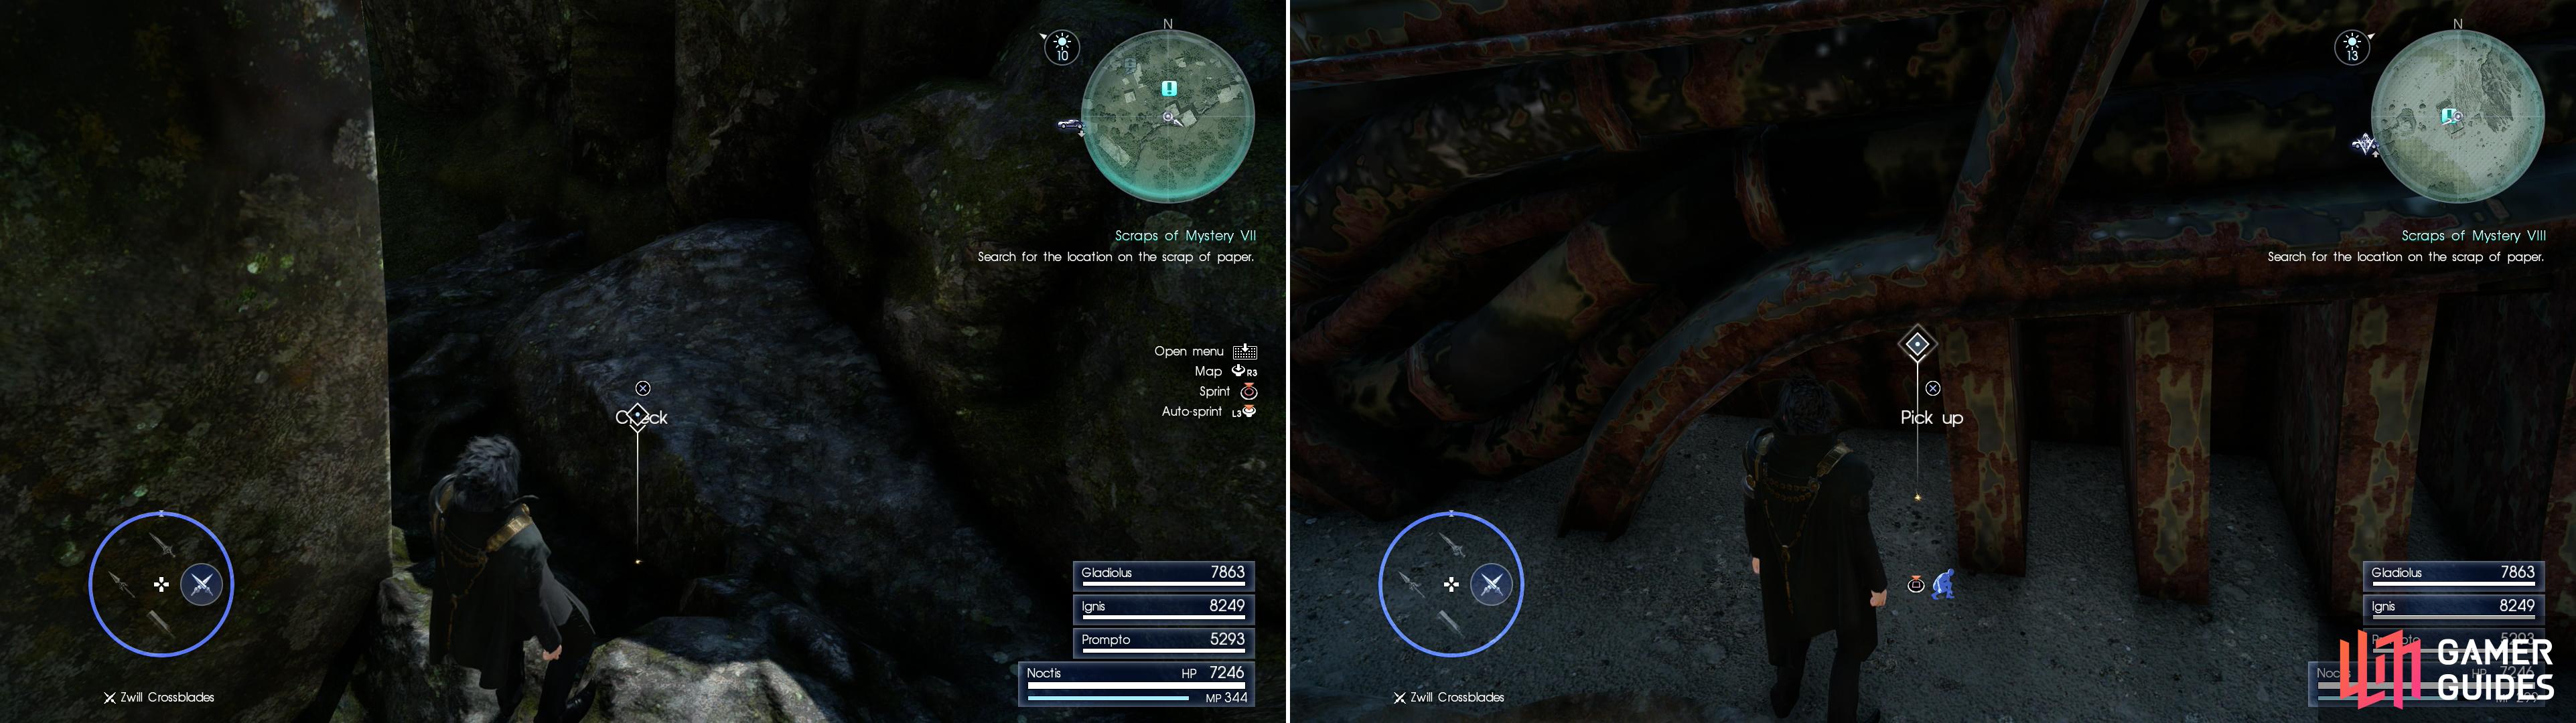 Sylvester’s Map Piece G can be found near Foclaugh Hollow dungeon (left) while Sylvester’s Map Piece H is near a dropship west of the Disc of Cauthess (right).